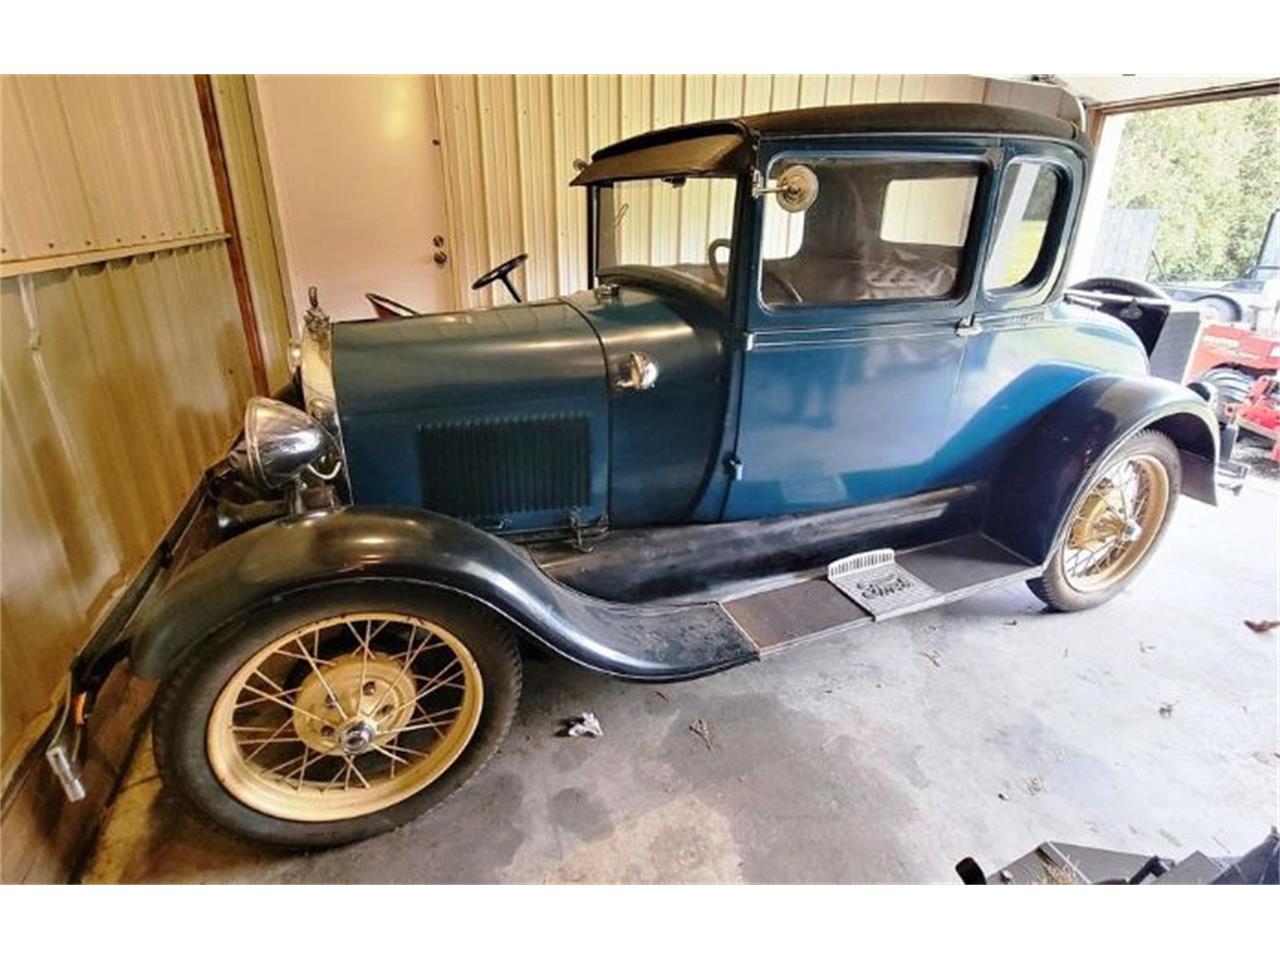 For Sale: 1928 Ford Model A in Cadillac, Michigan for sale in Cadillac, MI